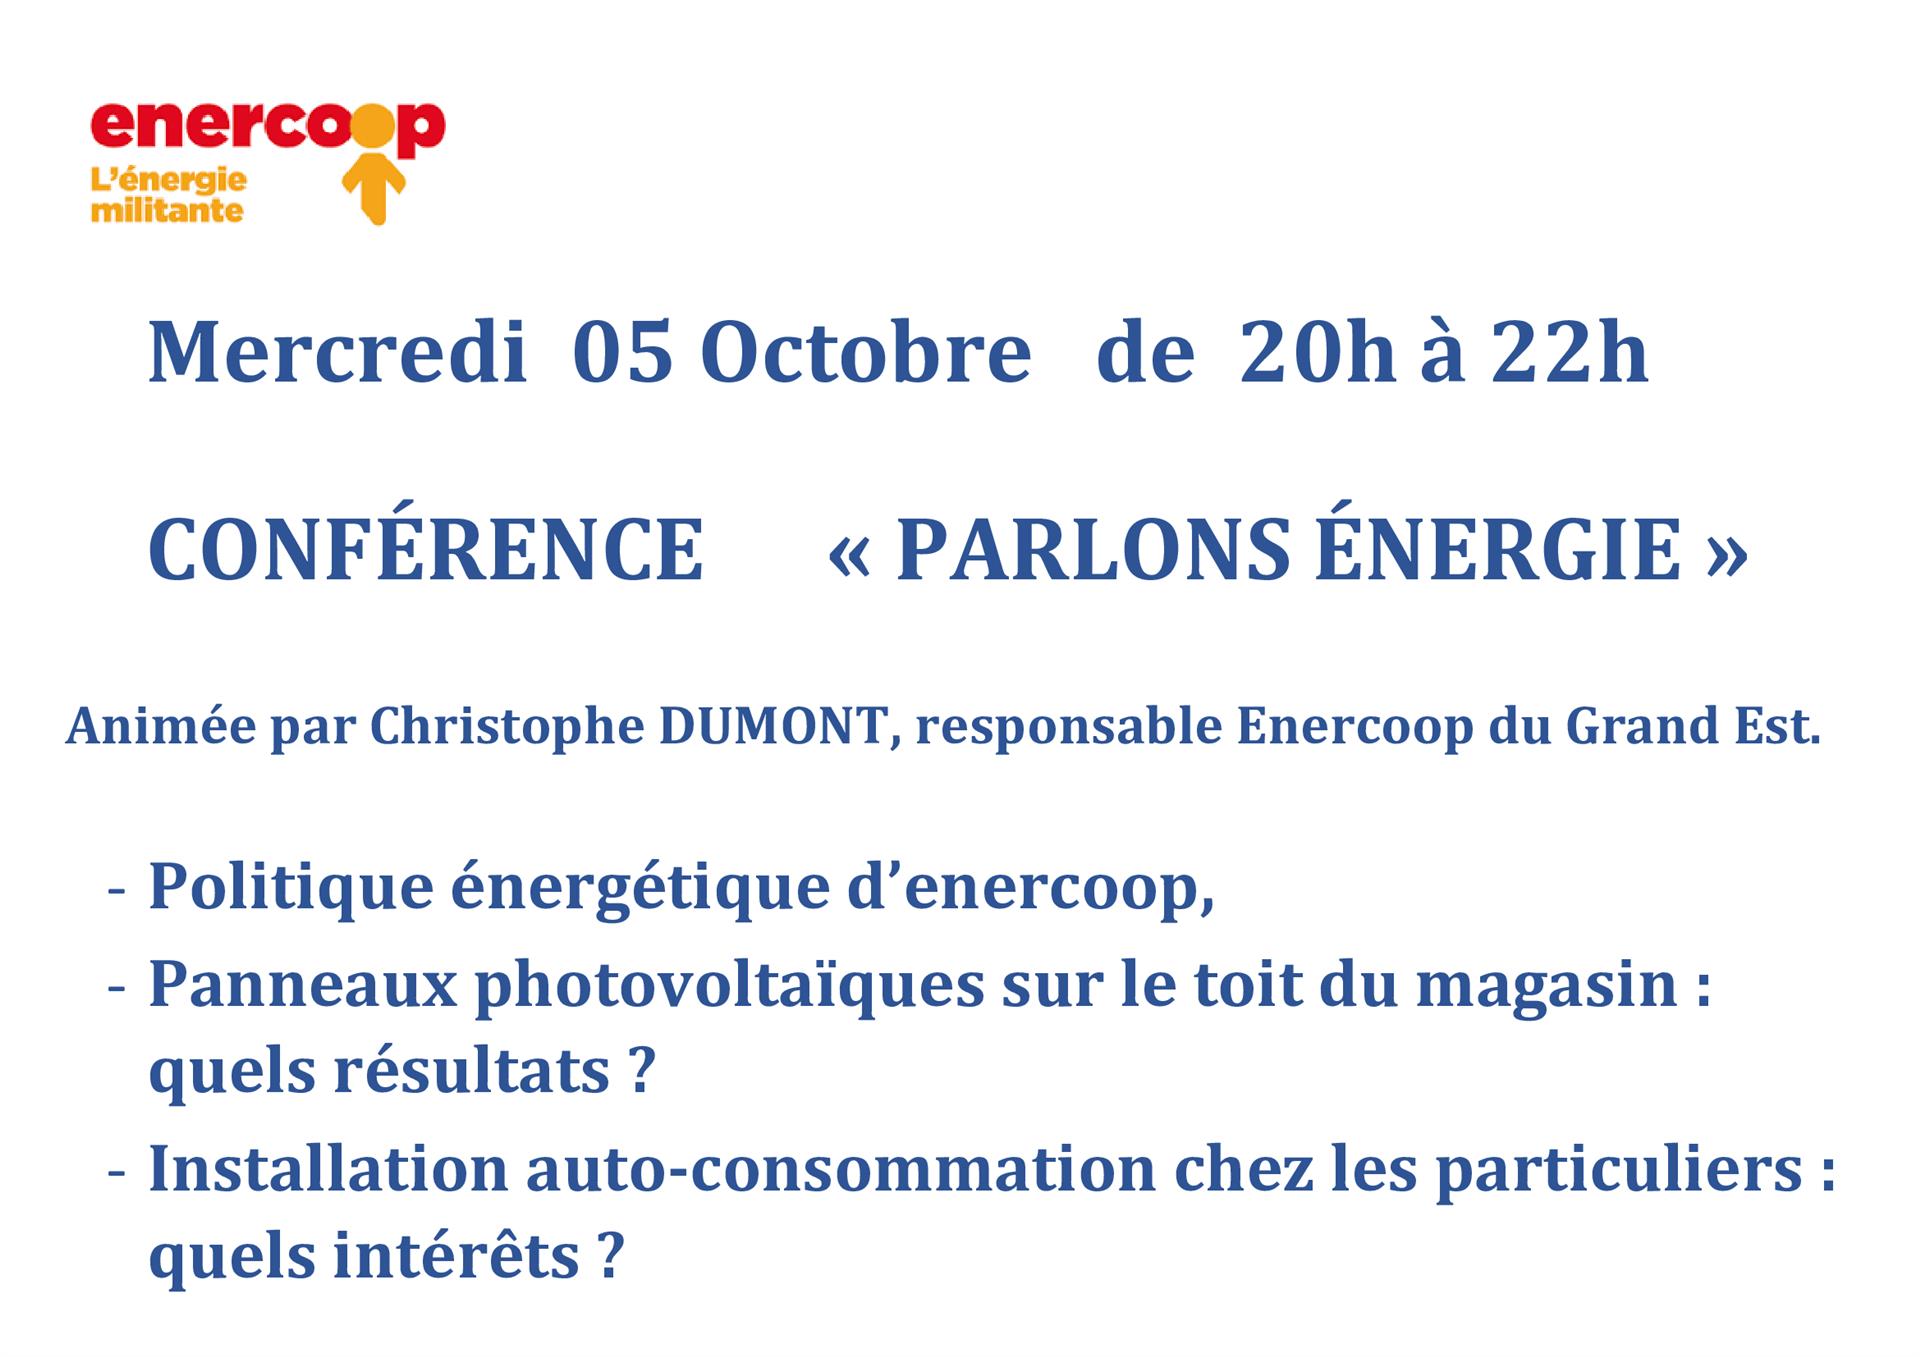 CONFERENCE (PARLONS ENERGIE)